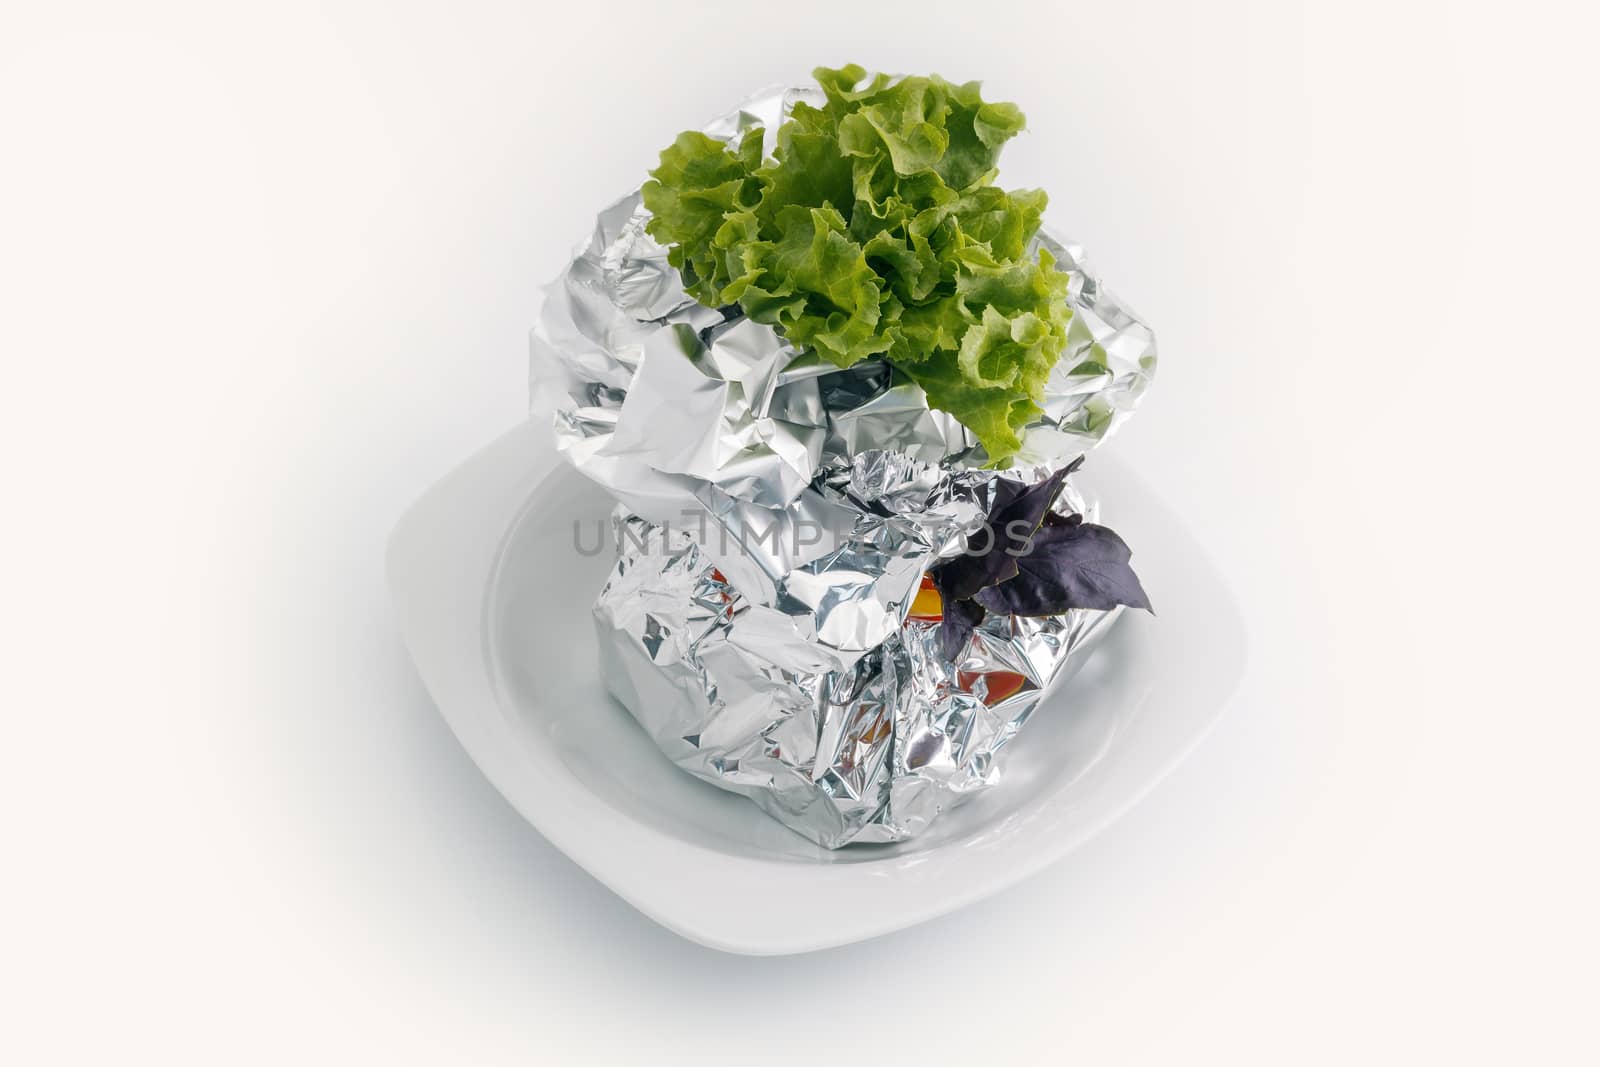 Meat, vegetables, fish baked in aluminum foil and decorated with fresh herbs. On a white plate close-up